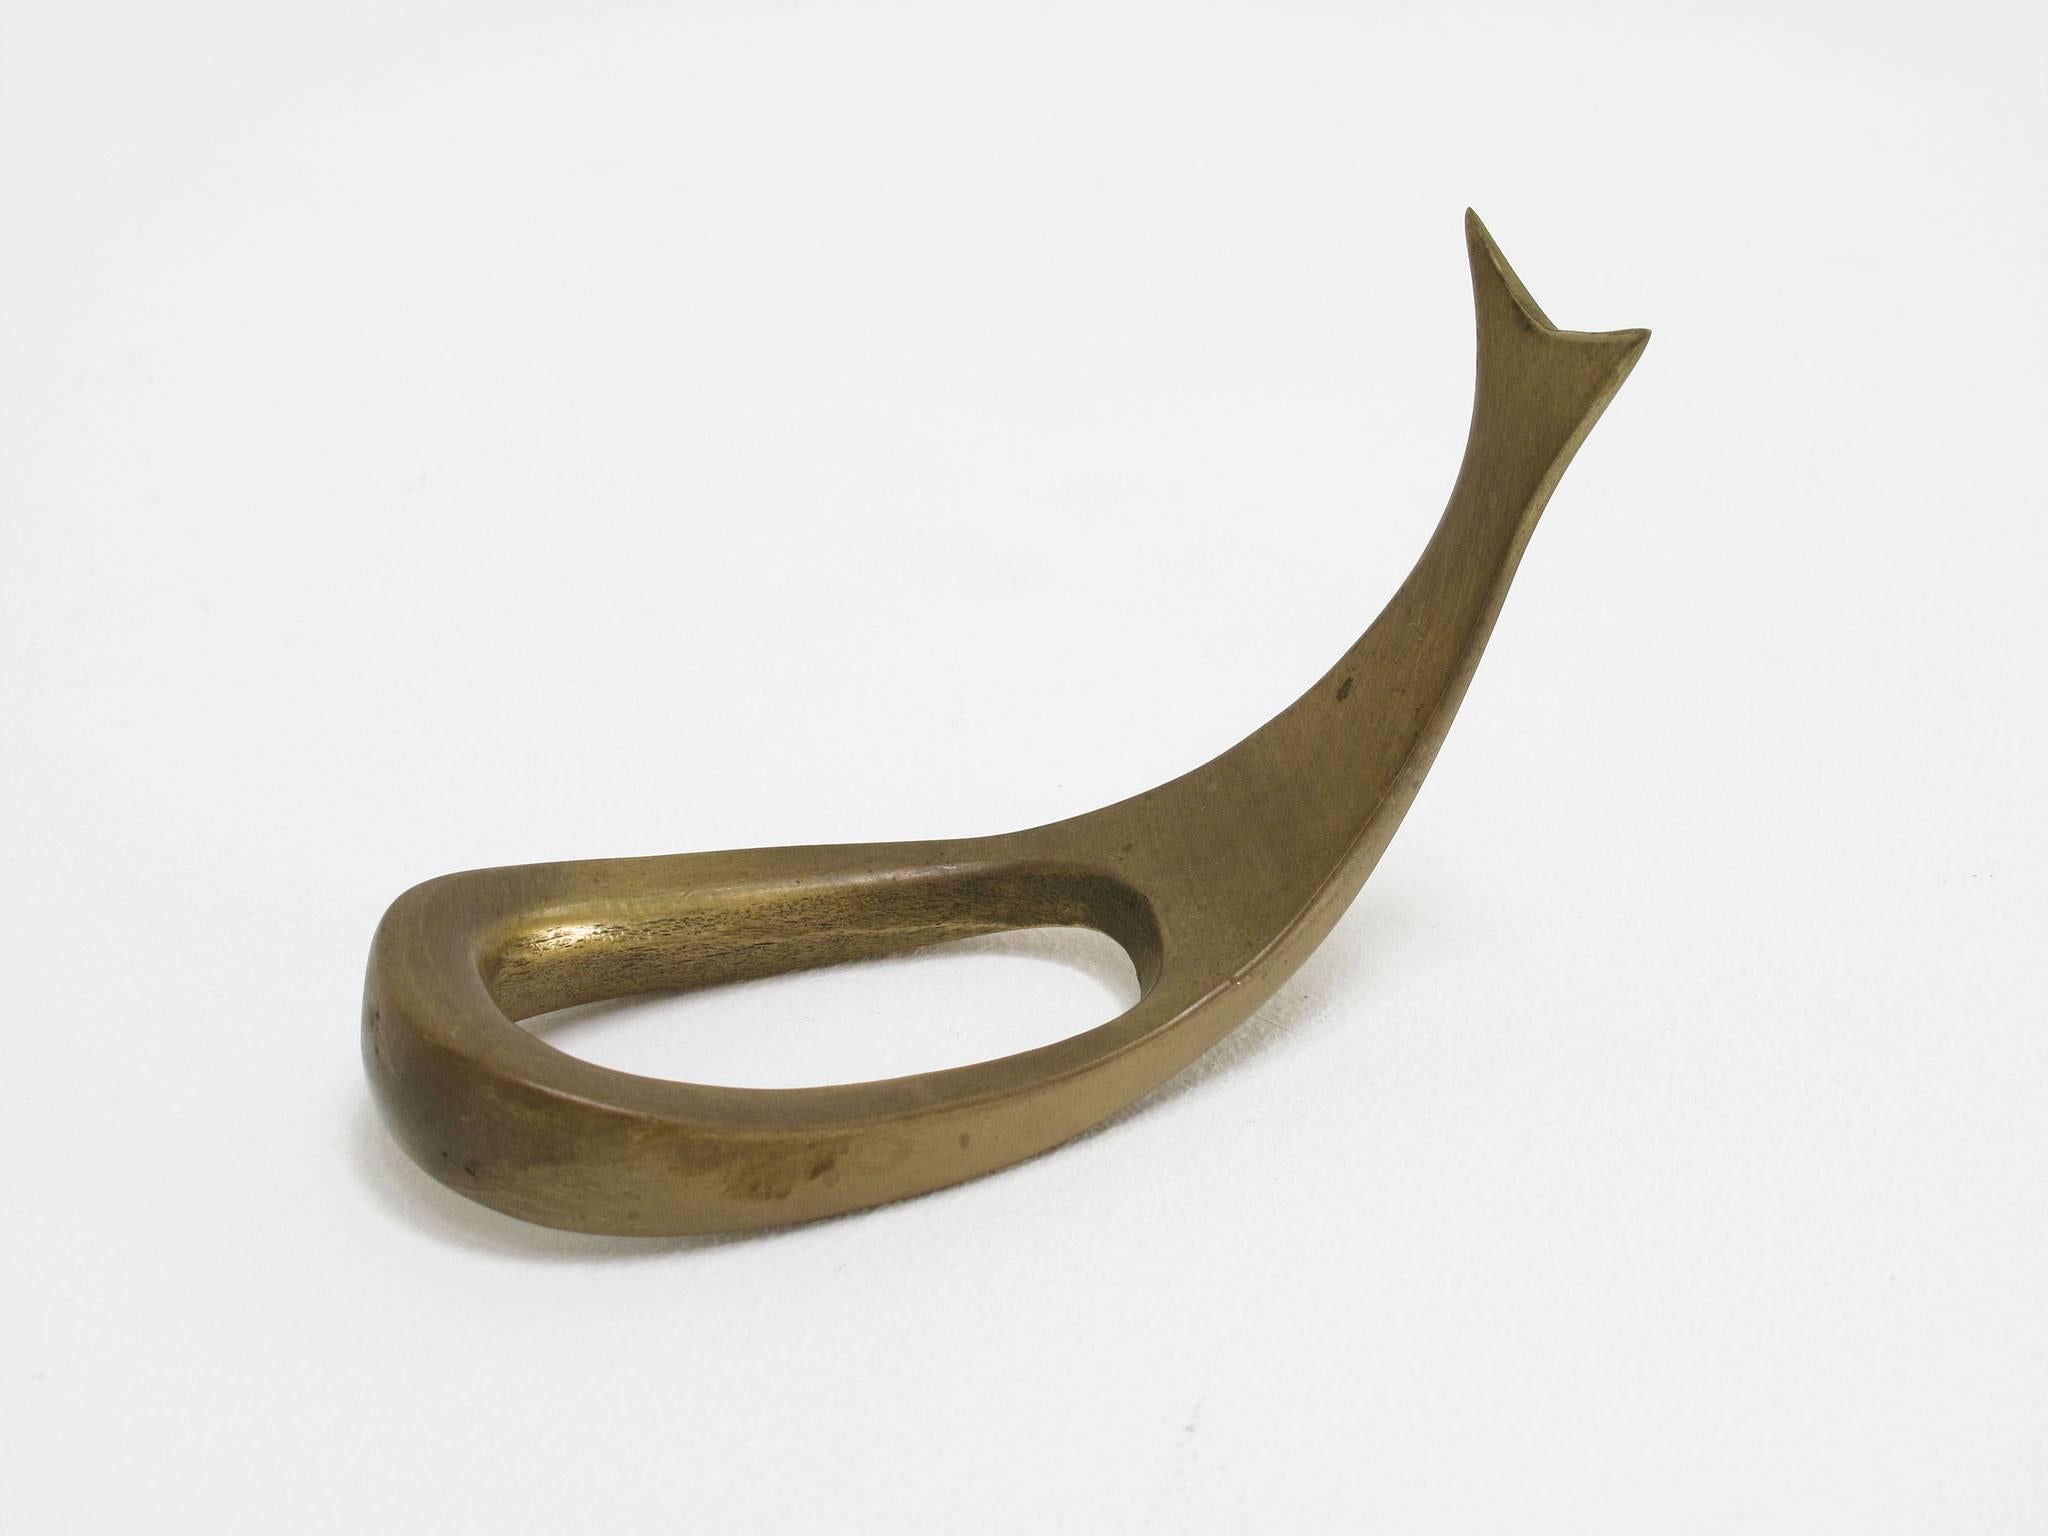 Decorative and functional object in solid brass, cast in an expressive form of a whale with a splashing tail, lightly patinated and rich in texture, attributed to Carl Auböck, 1960s.

Measurements in inches: 2 high x 4 wide x 1.5 deep